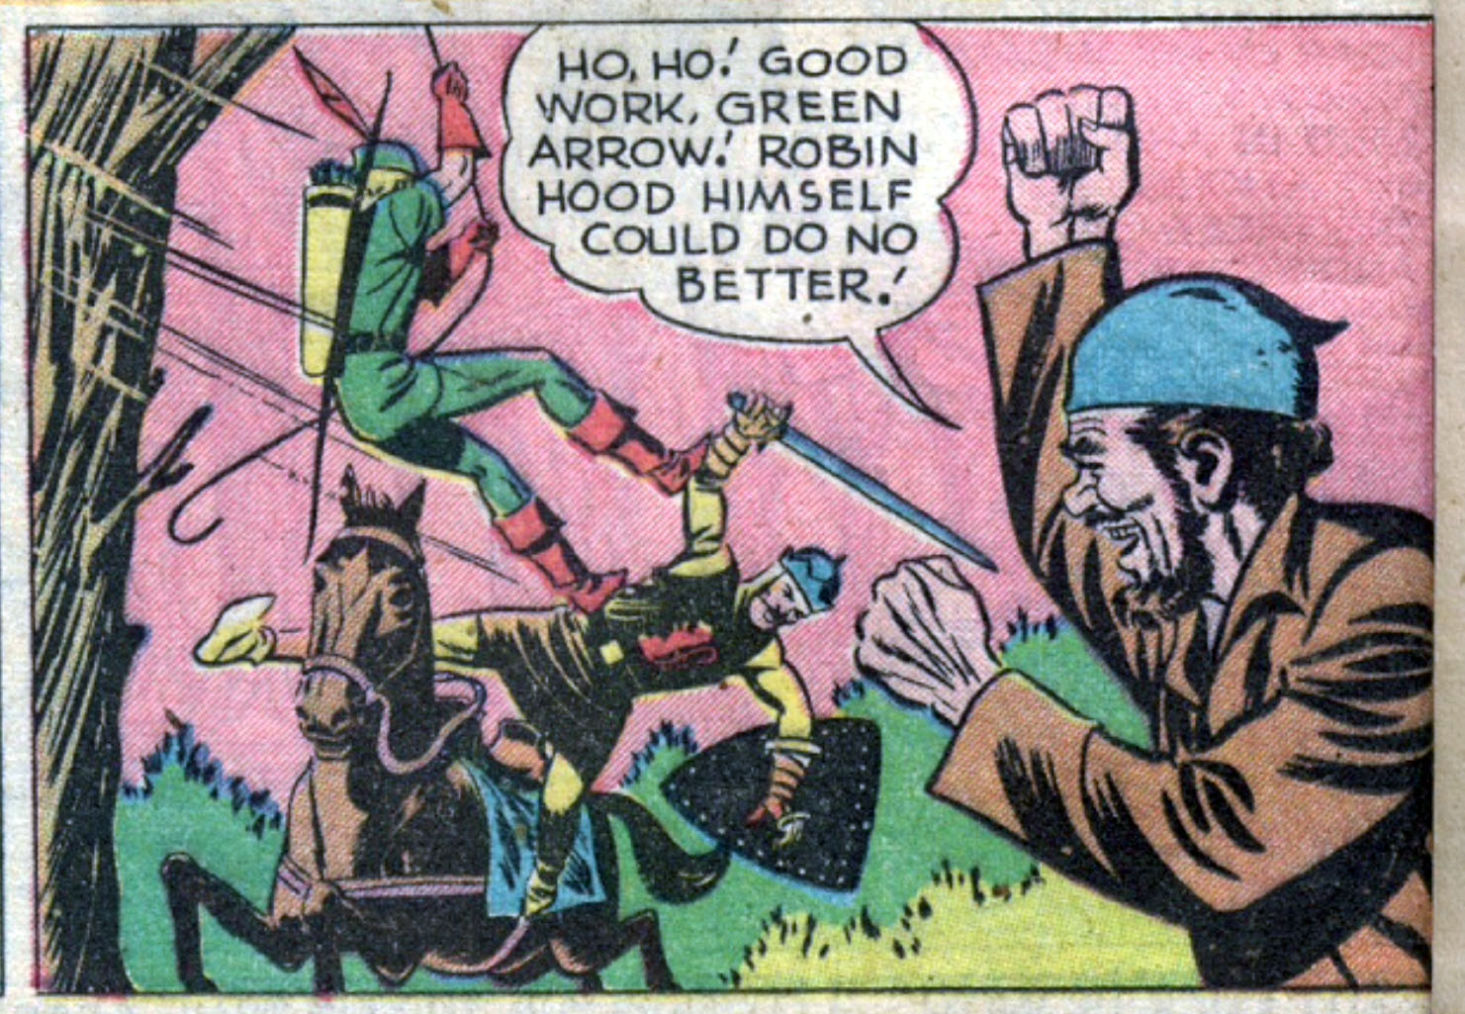 Green Arrow in the past on his arrowline, art by George Papp